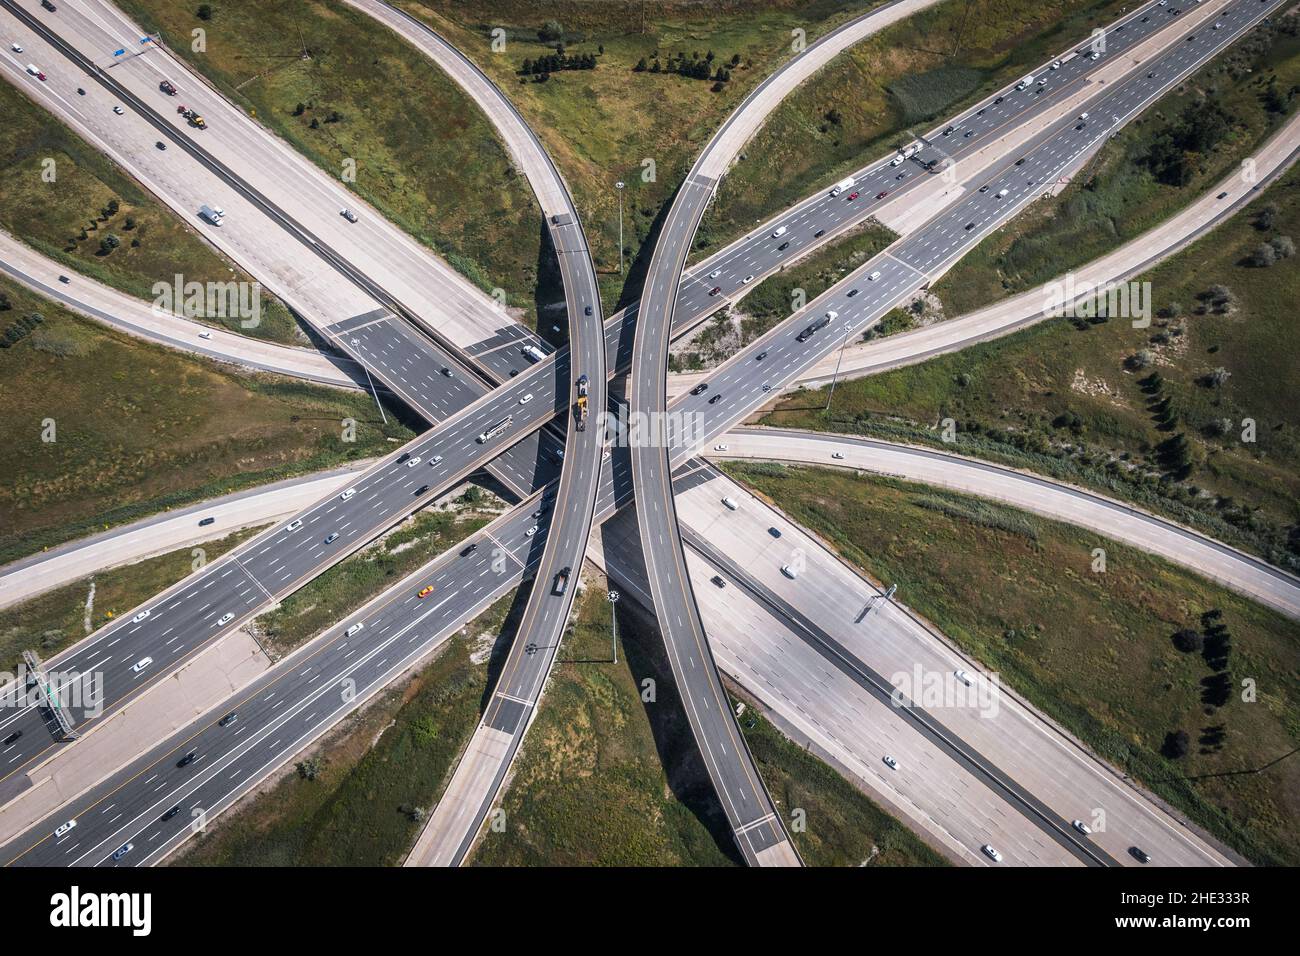 Aerial view of traffic on freeway overpass in Toronto, Ontario, Canada, North America. Stock Photo